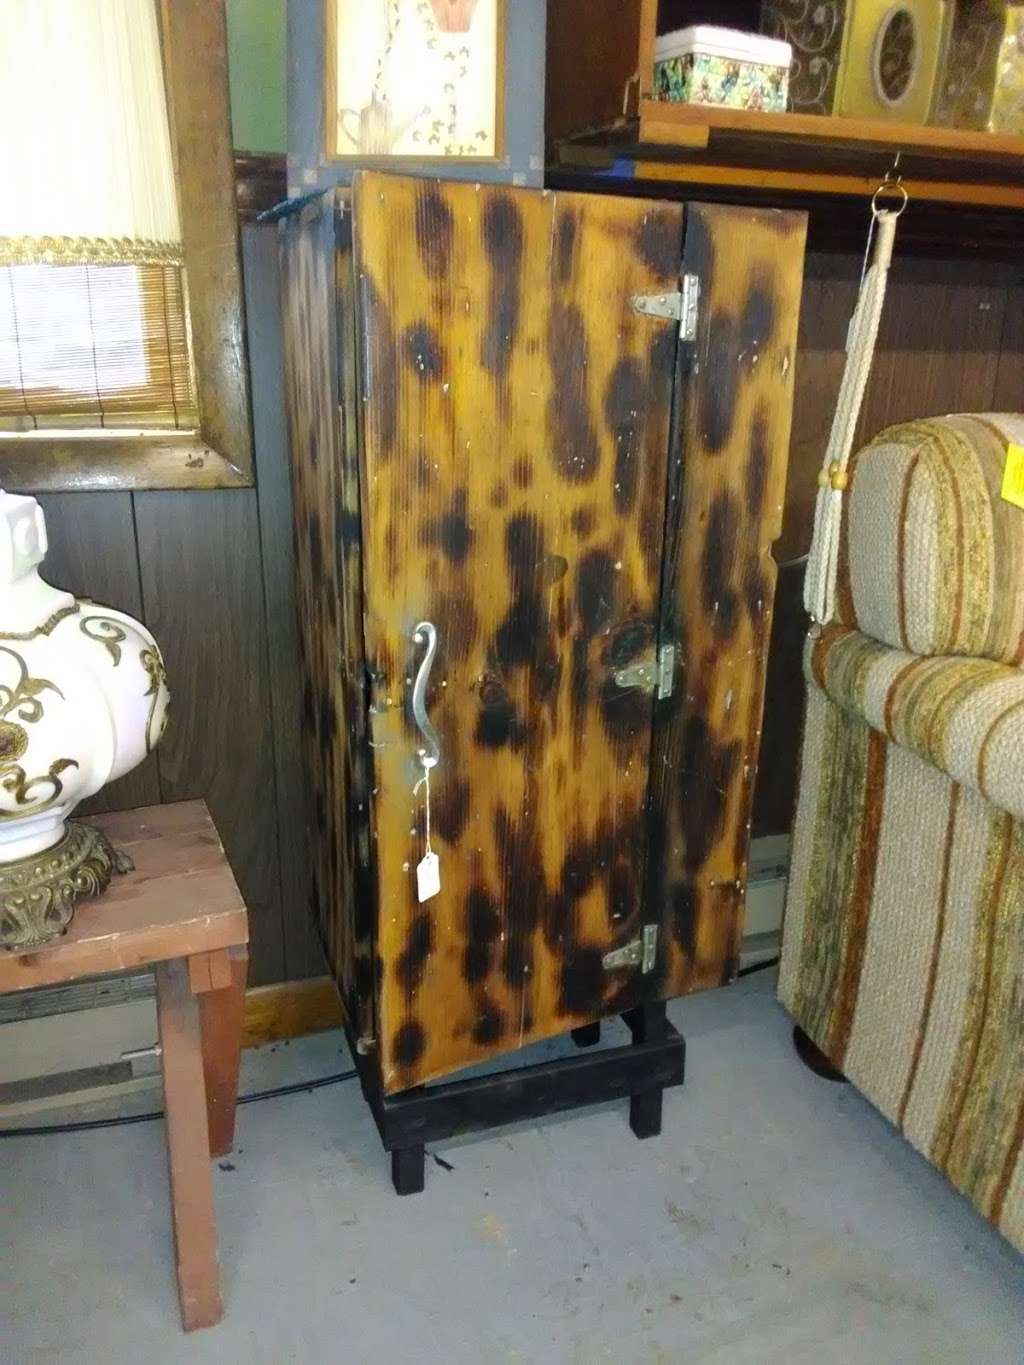 Dorothys Furniture N Appliance Store | 26809 Great Cove Rd, Mcconnellsburg, PA 17233 | Phone: (717) 377-1013